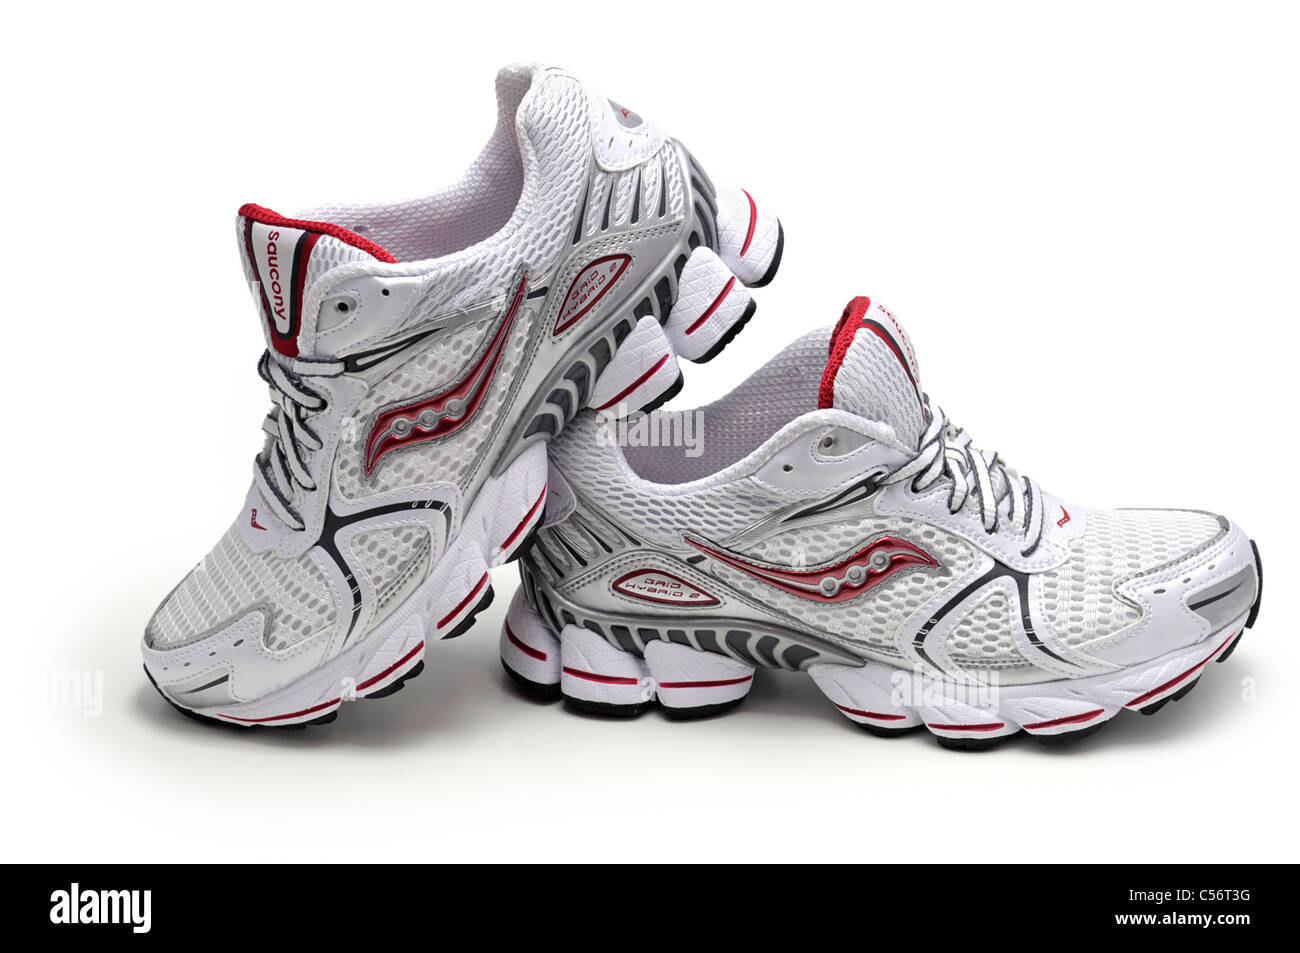 Trainers Sneakers Runners, Running Shoes Stock Photo